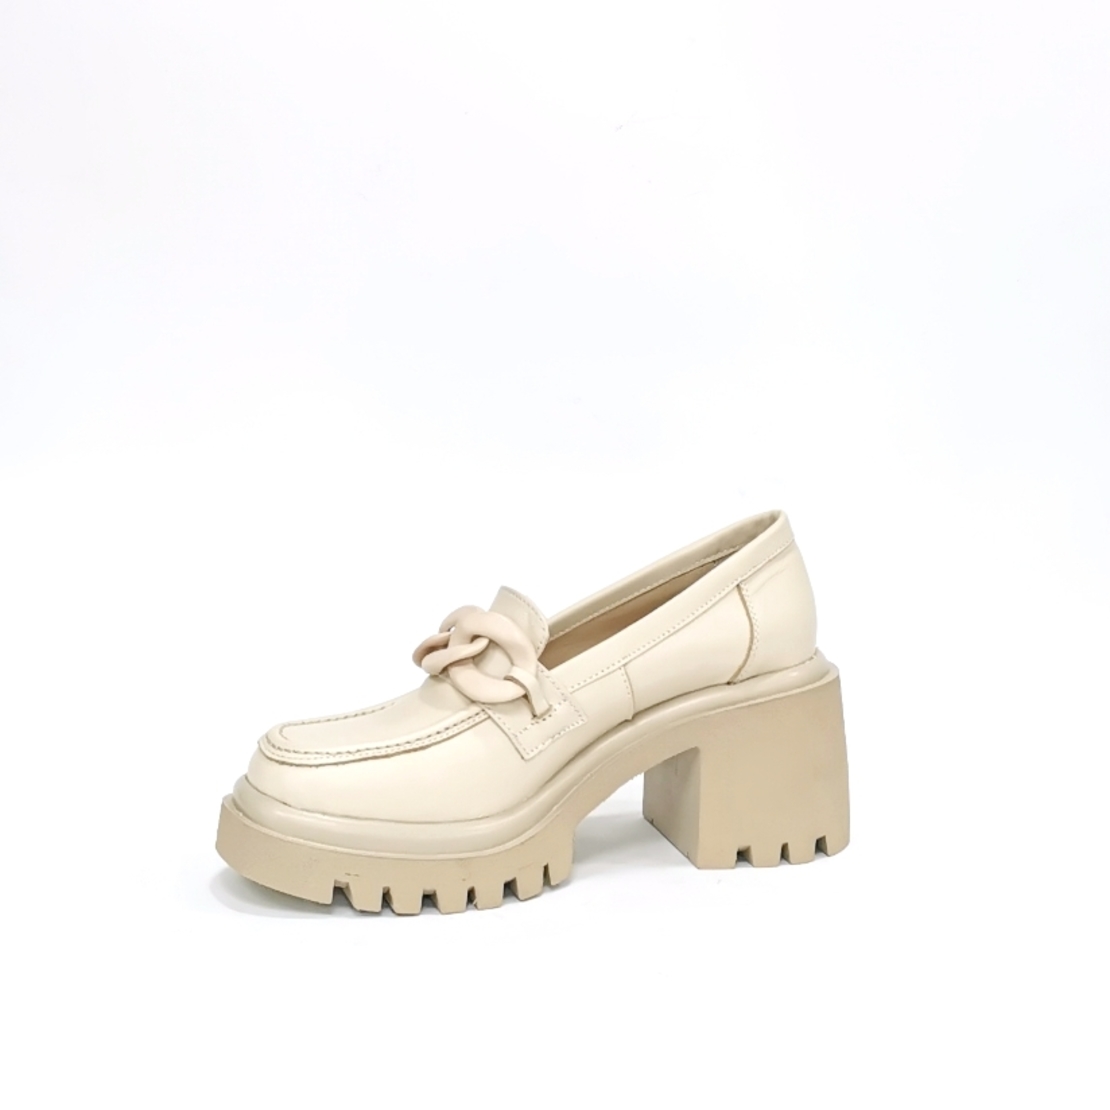 Women's moccasins / loafers / made of natural leather in beige color/727719